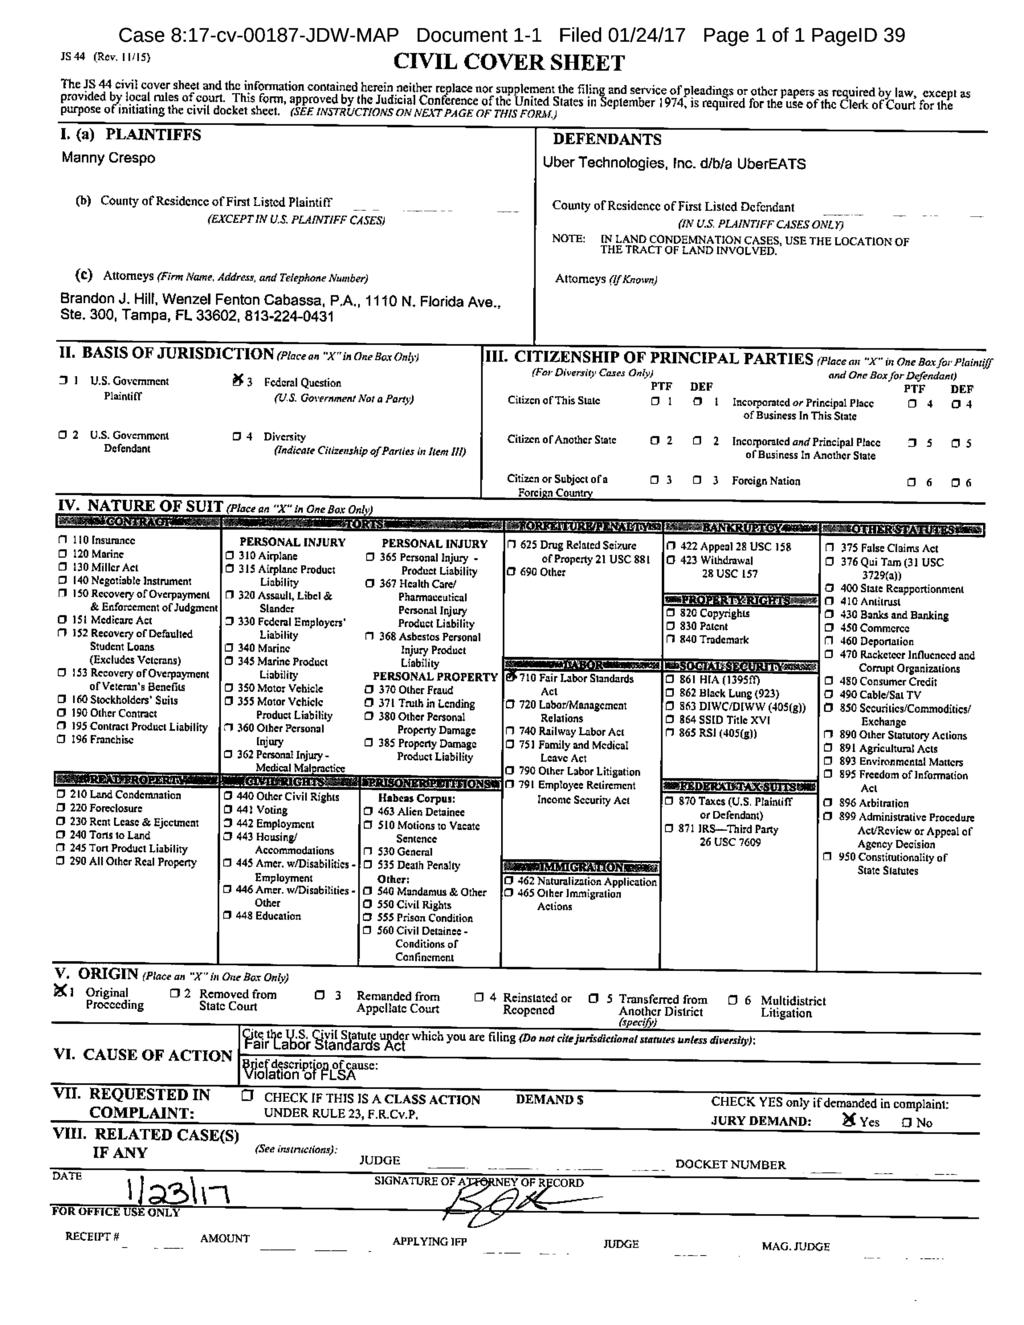 41.-VIN.rn Case 8:17-cv-00187-JDW-MAP Document 1-1 Filed 01/24/17 Page 1 of 1 PagelD 39.